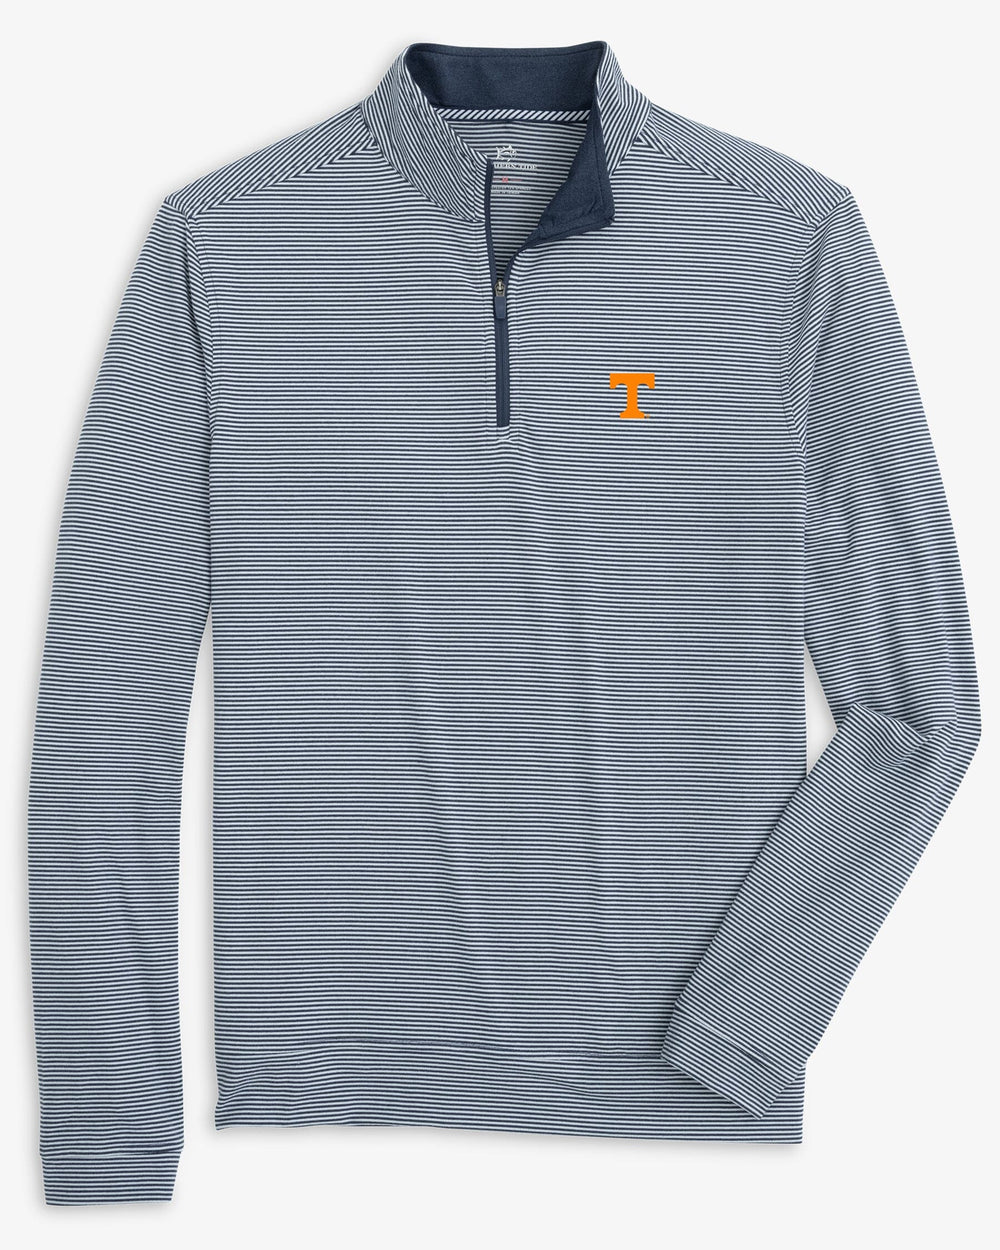 The front view of the Tennessee Vols Cruiser Micro-Stripe Heather Quarter Zip by Southern Tide - Heather Navy